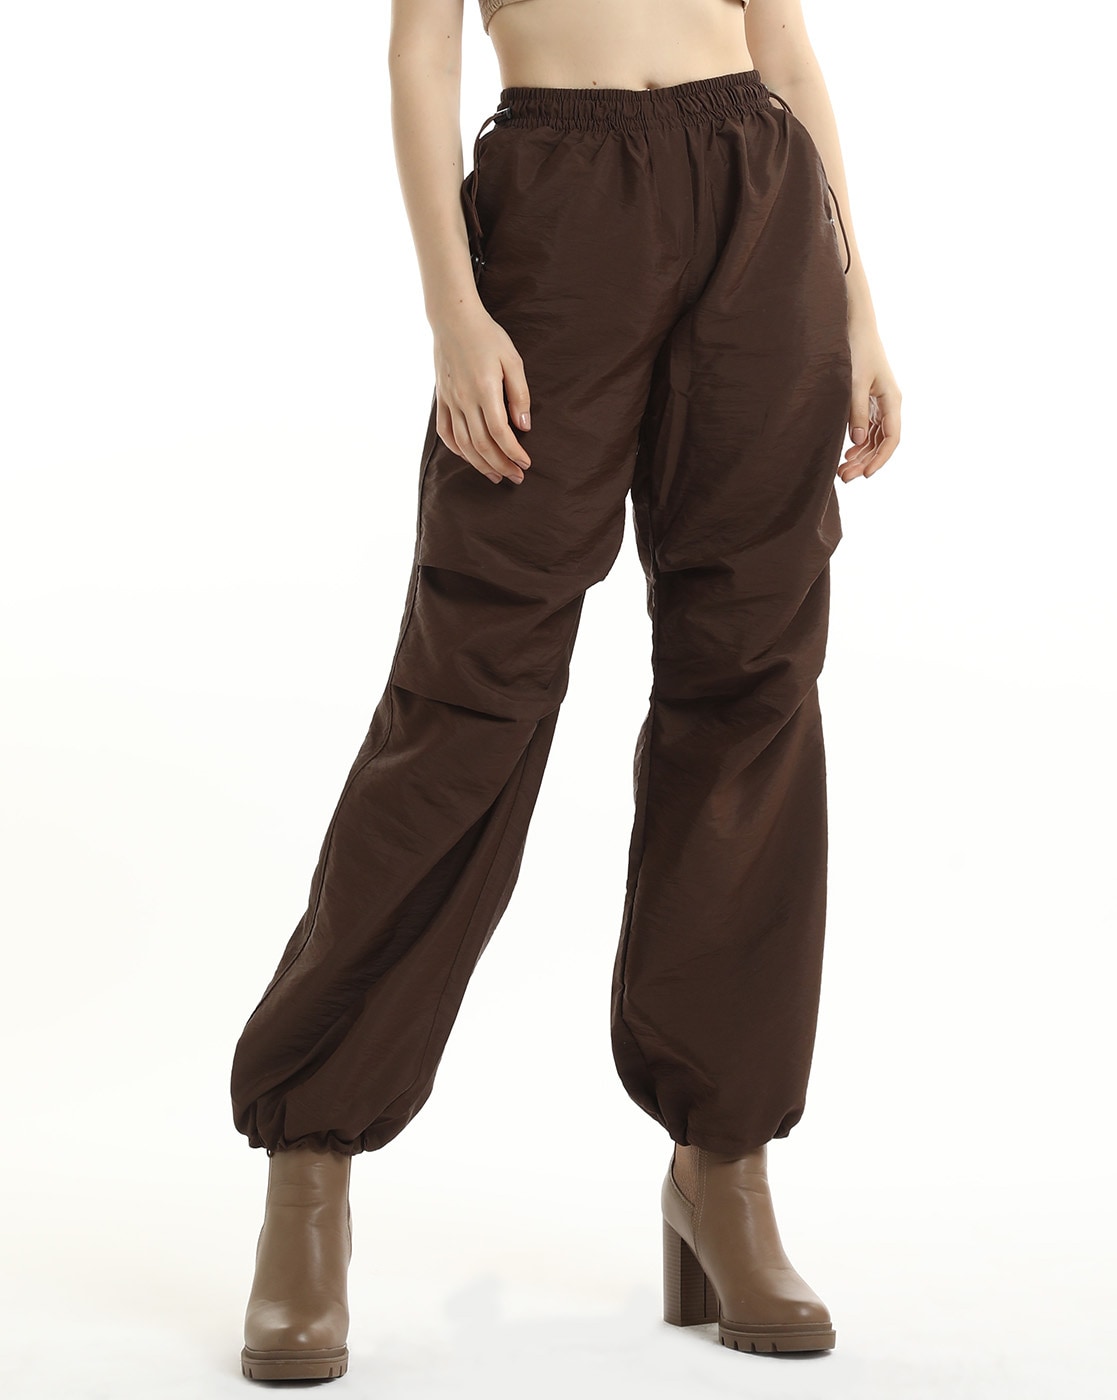 Swana Comfortlux Women's Brown Super High Waisted Ankle Length